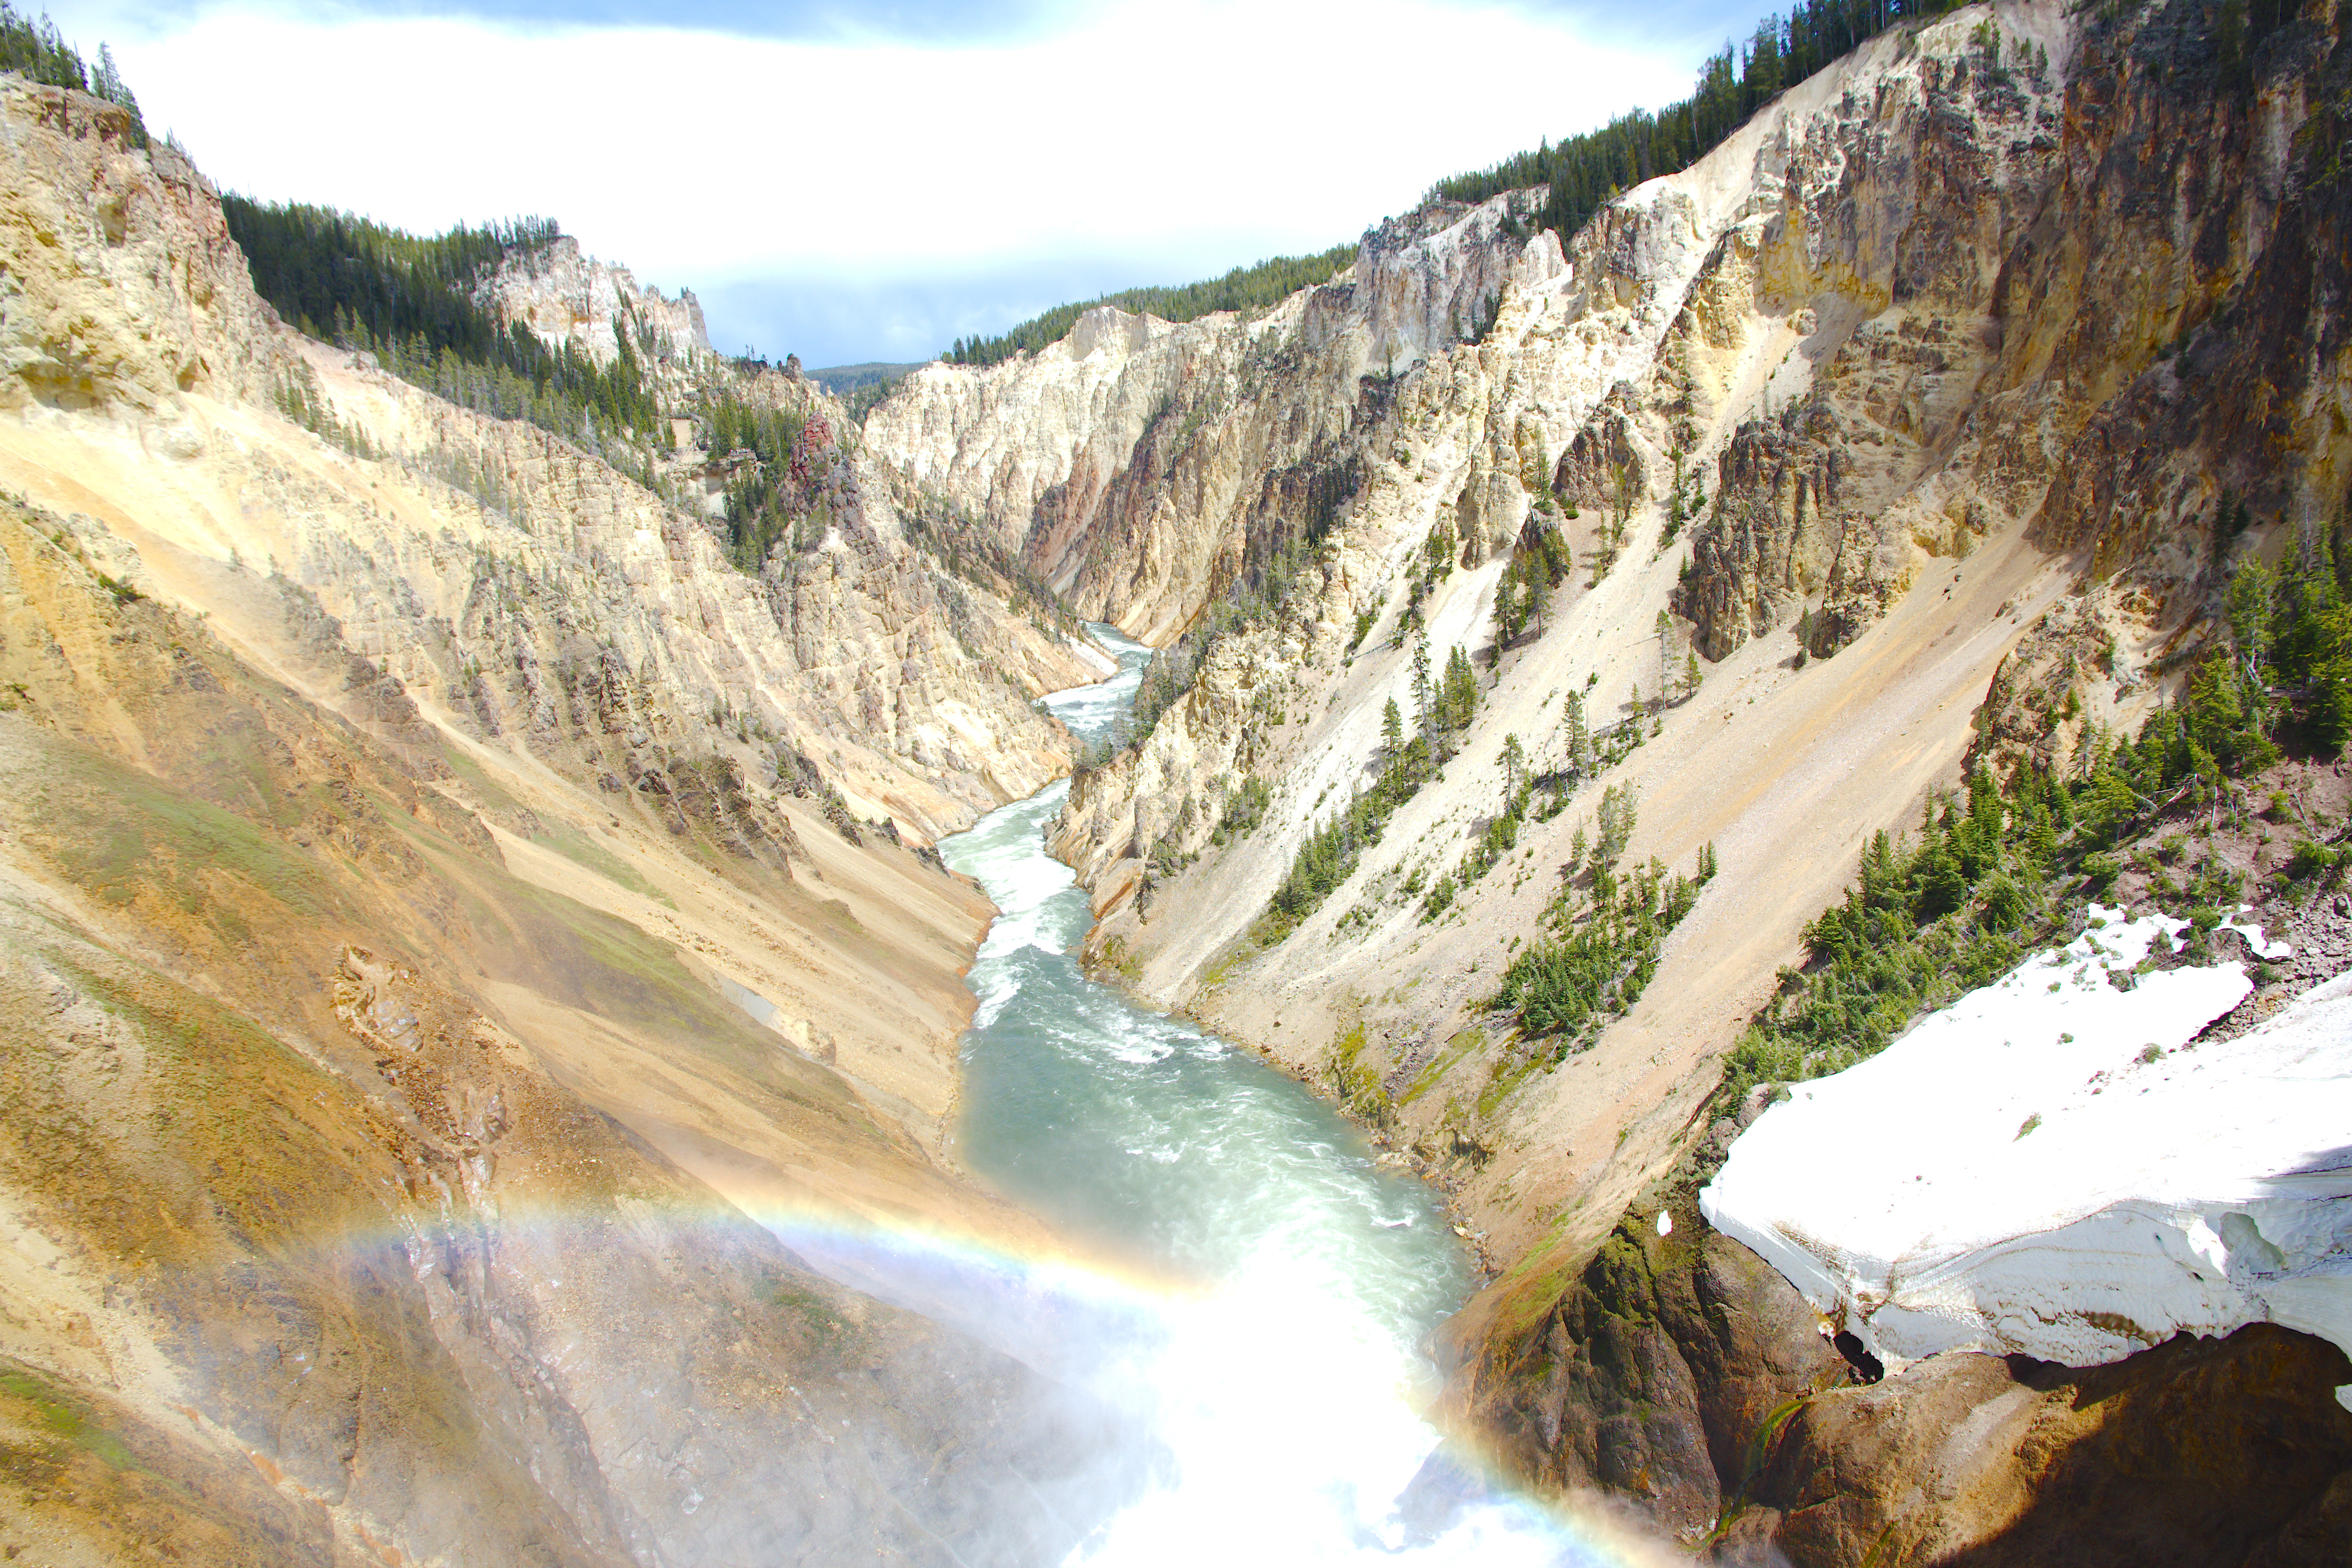 The Grand Canyon of YellowStone